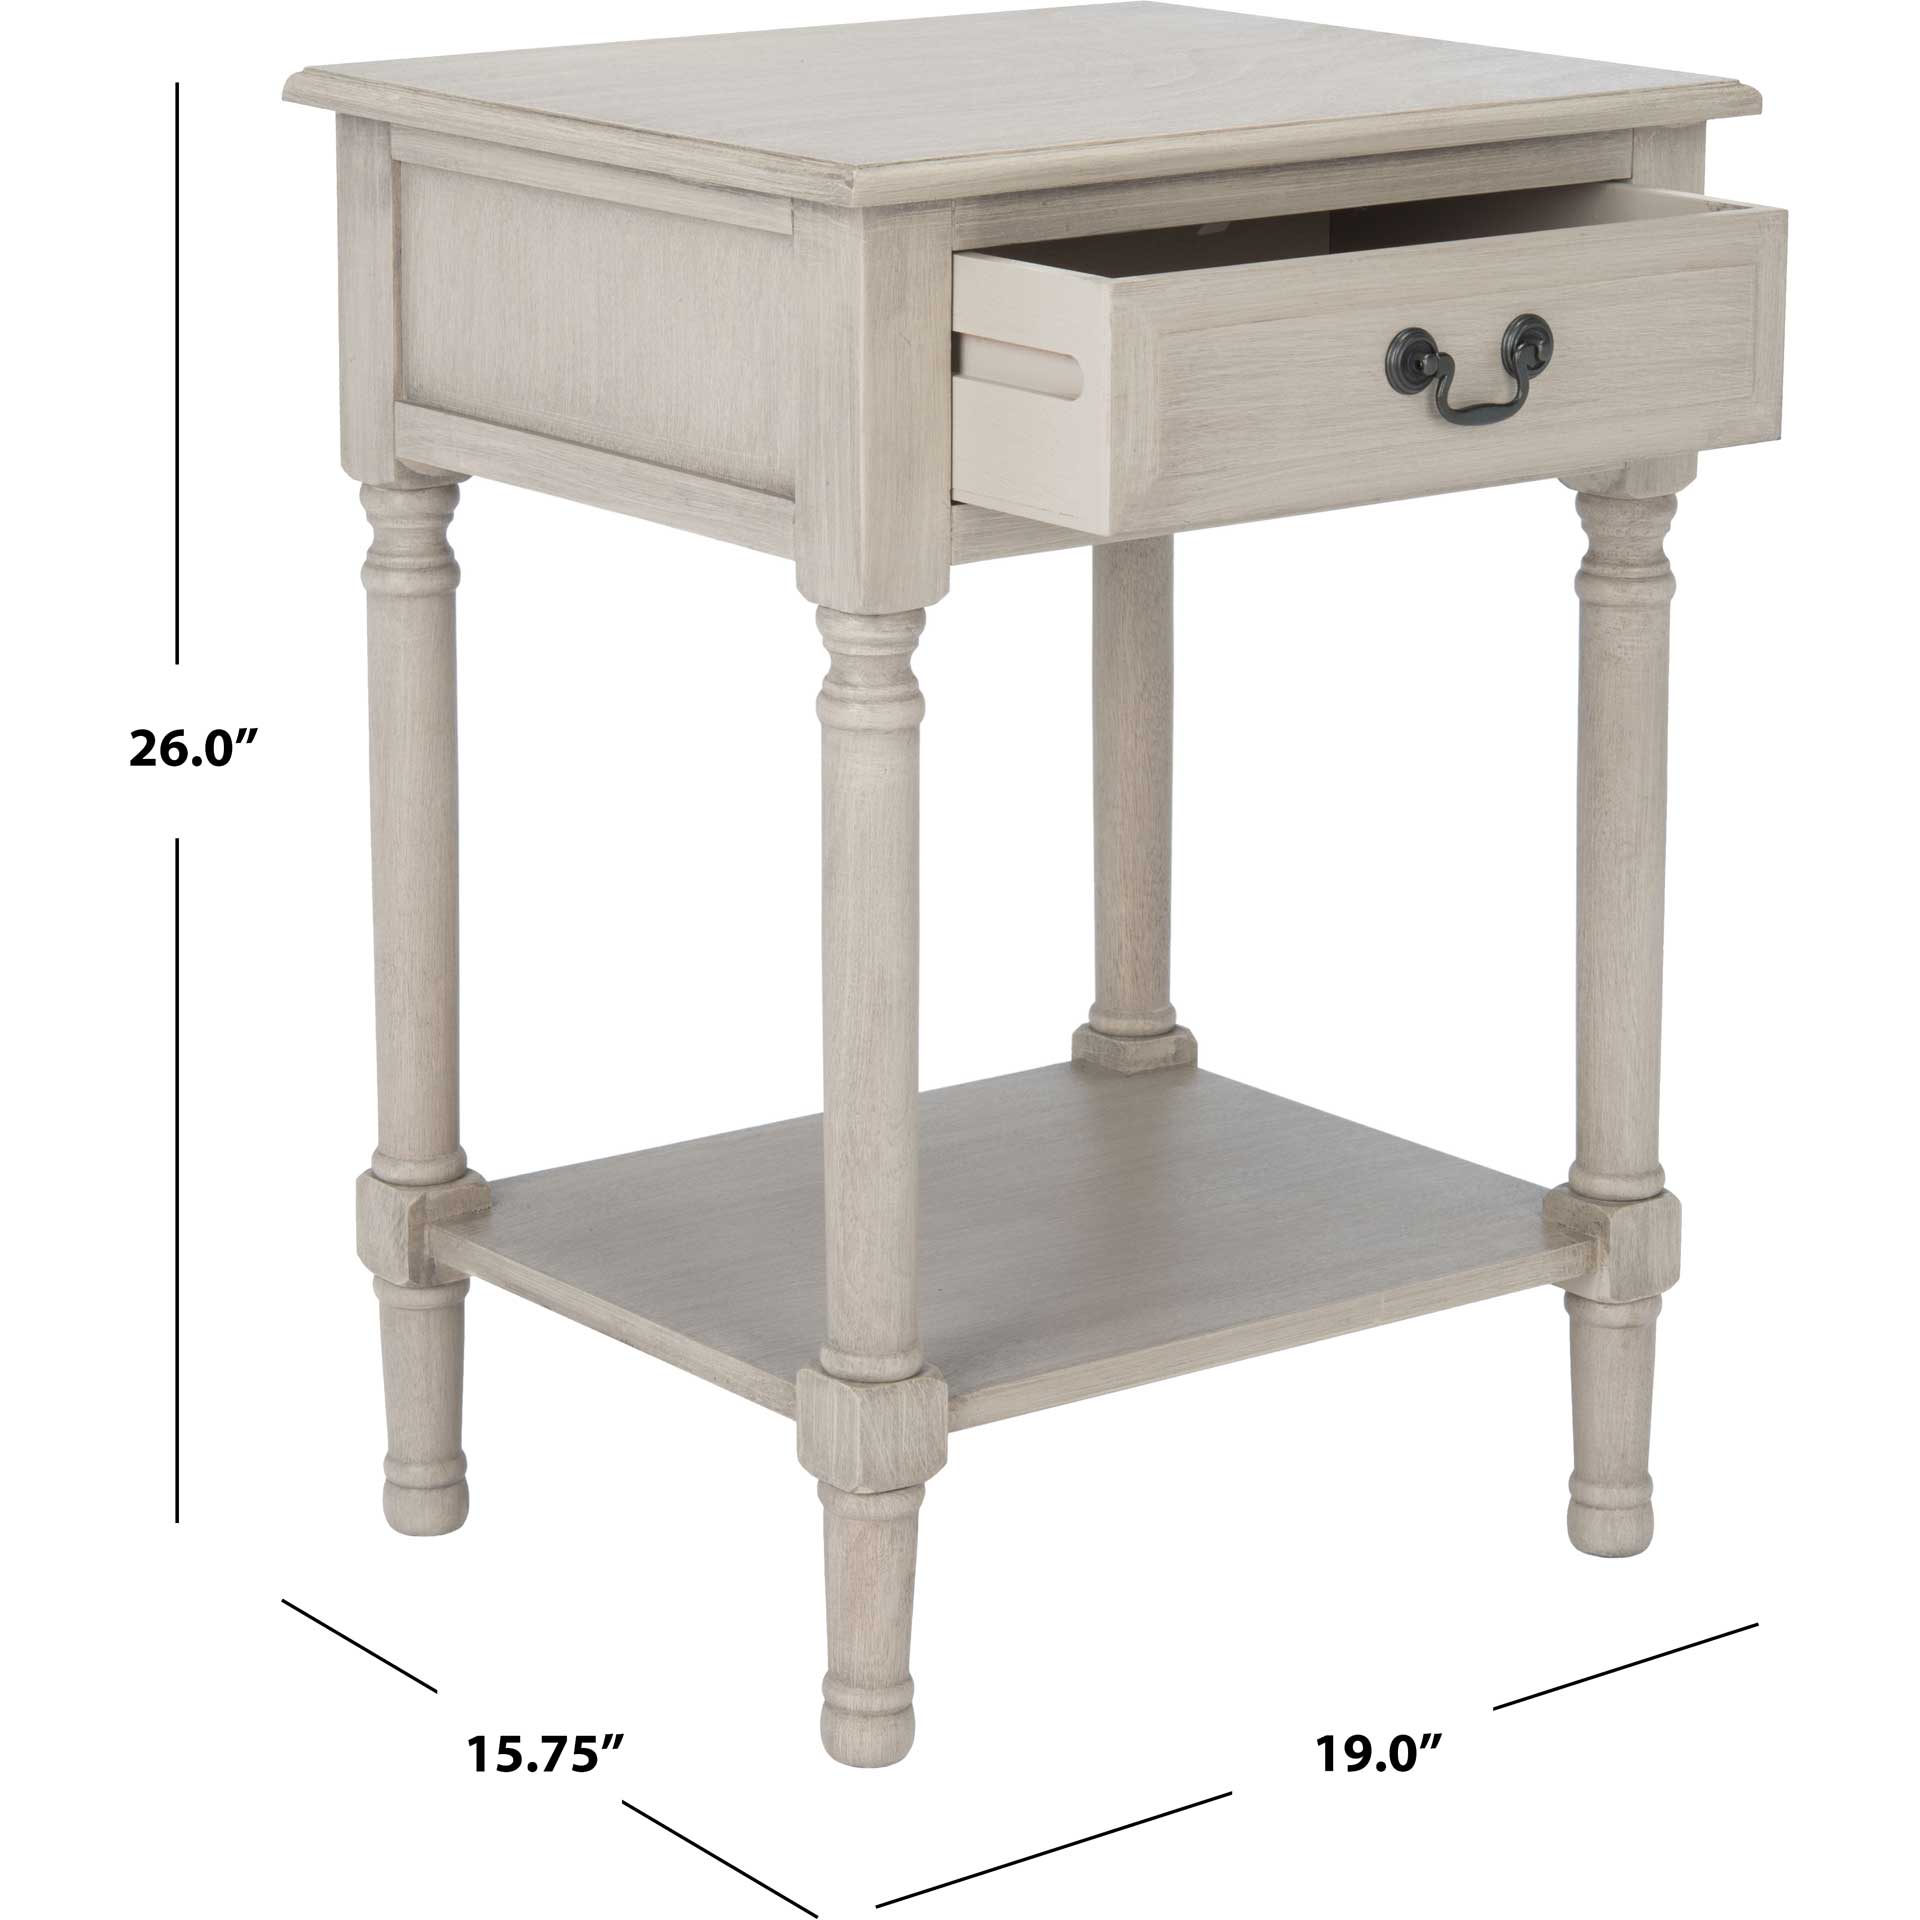 Whalen 1 Drawer Accent Table Greige